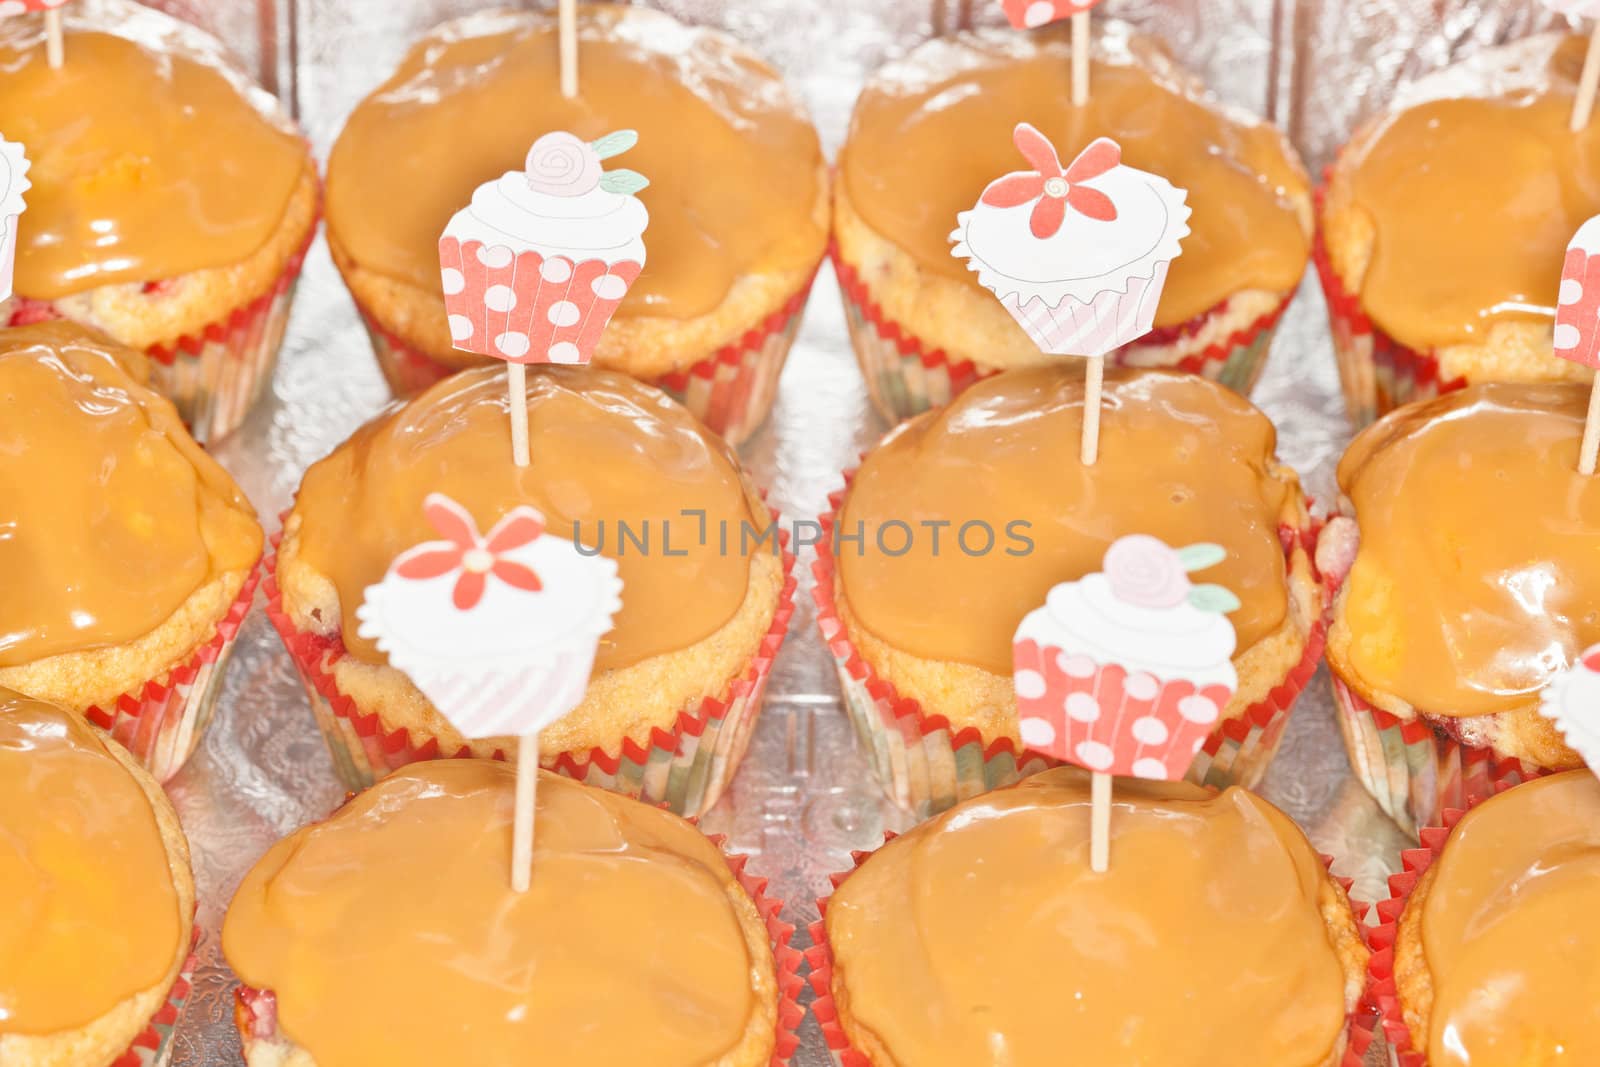 Tray of freshly baked homemade strawberry cupcakes with caramel topping